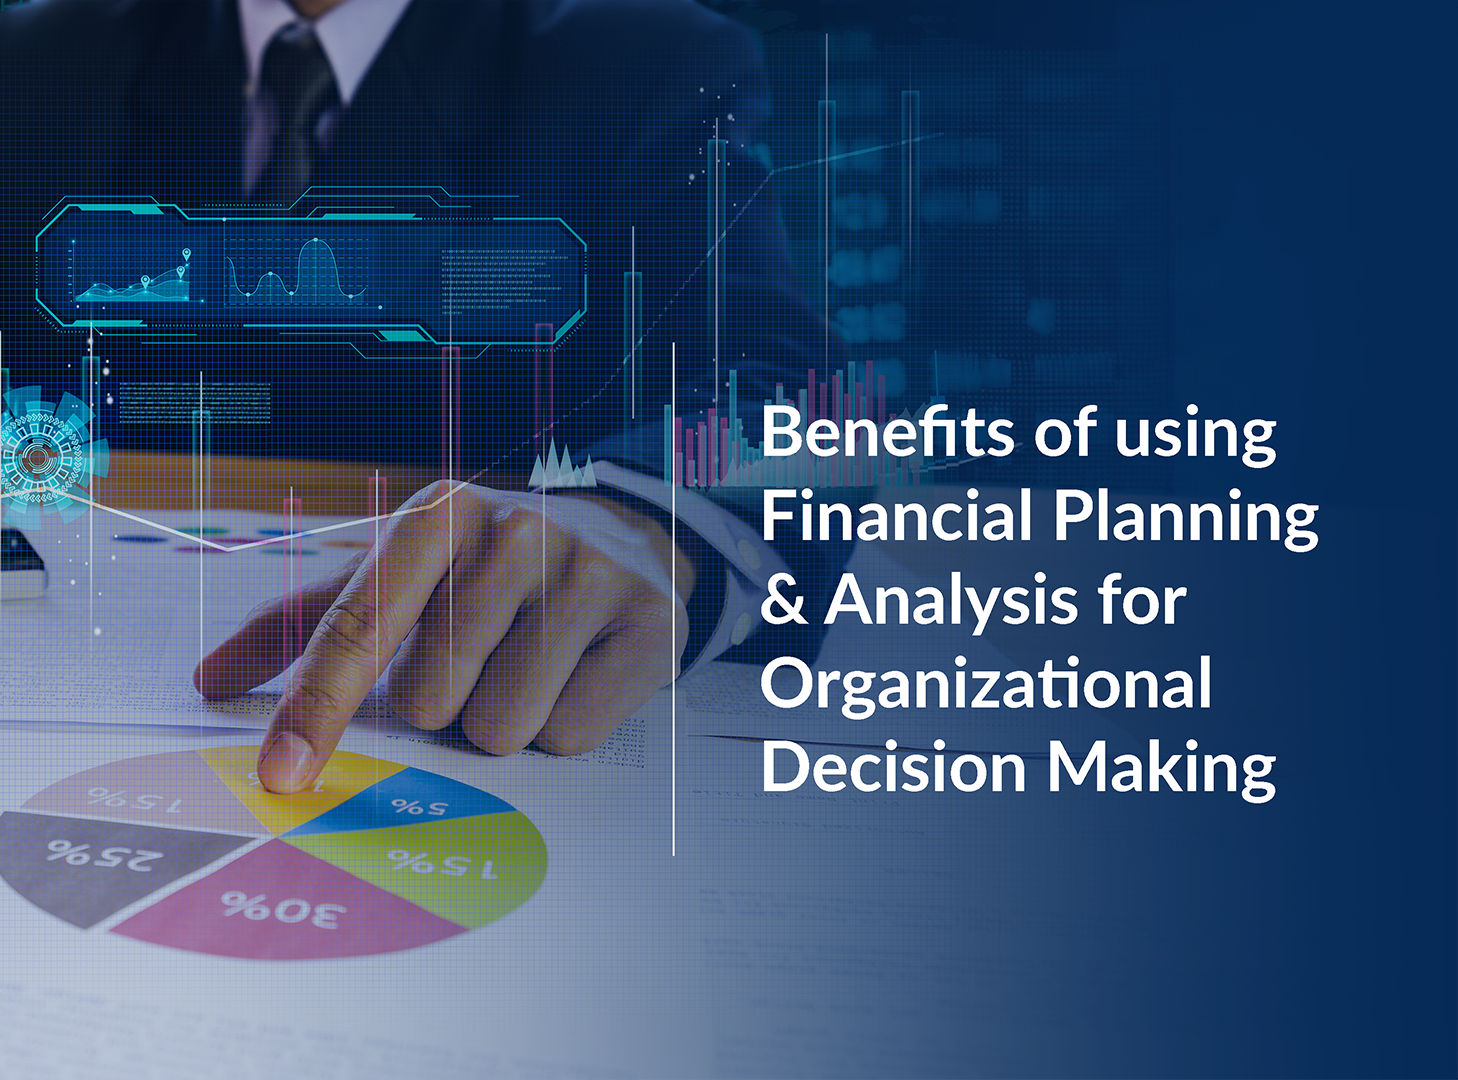 Benefits of using Financial Planning & Analysis for Organizational Decision Making